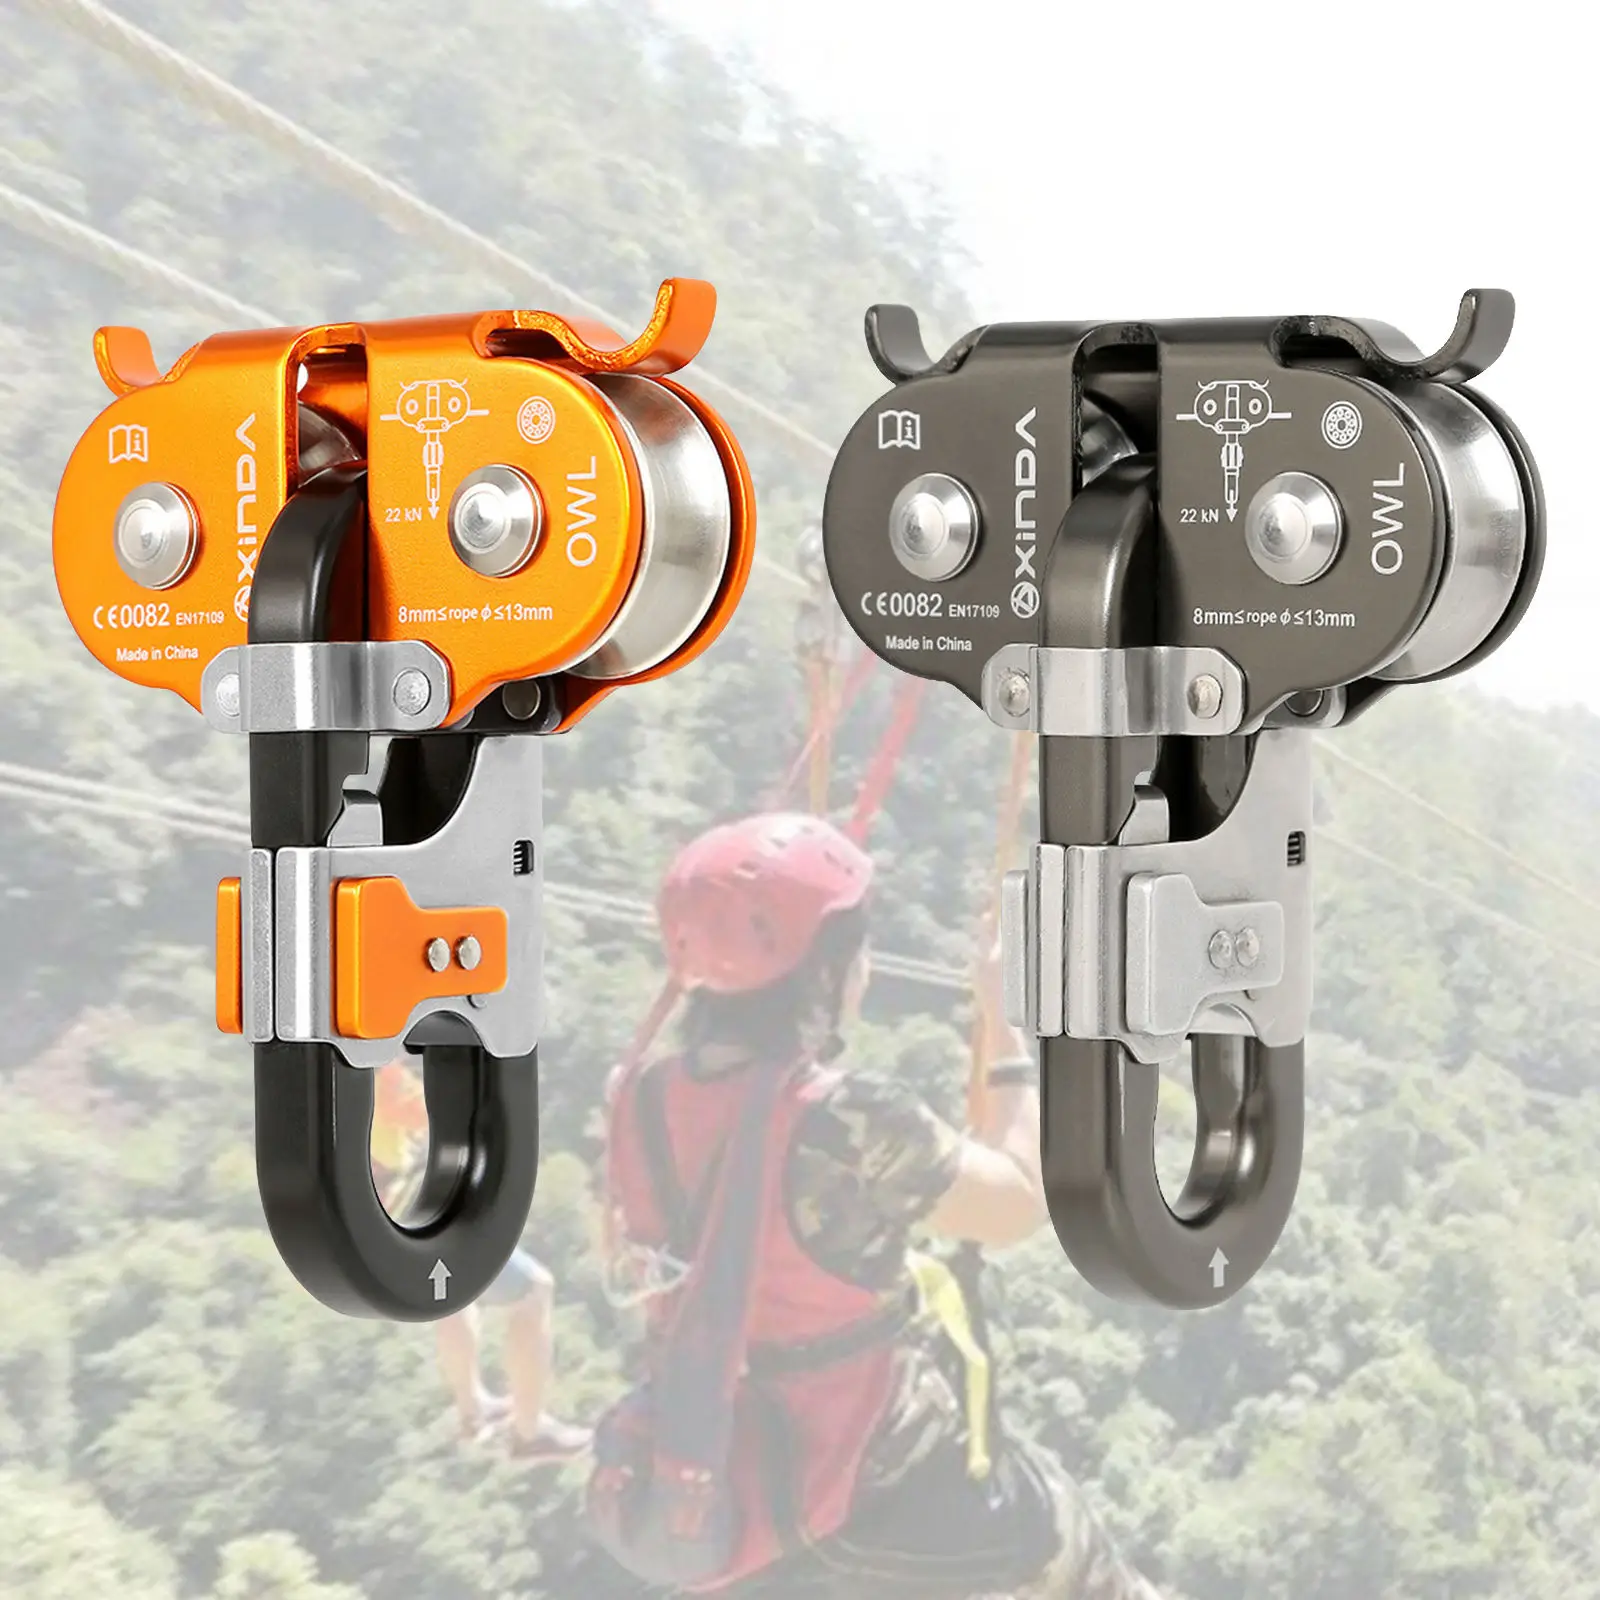 Rock Climbing Zip Line Steel Cable Trolley Fast Speed Dual Pulley for Hauling Lifting